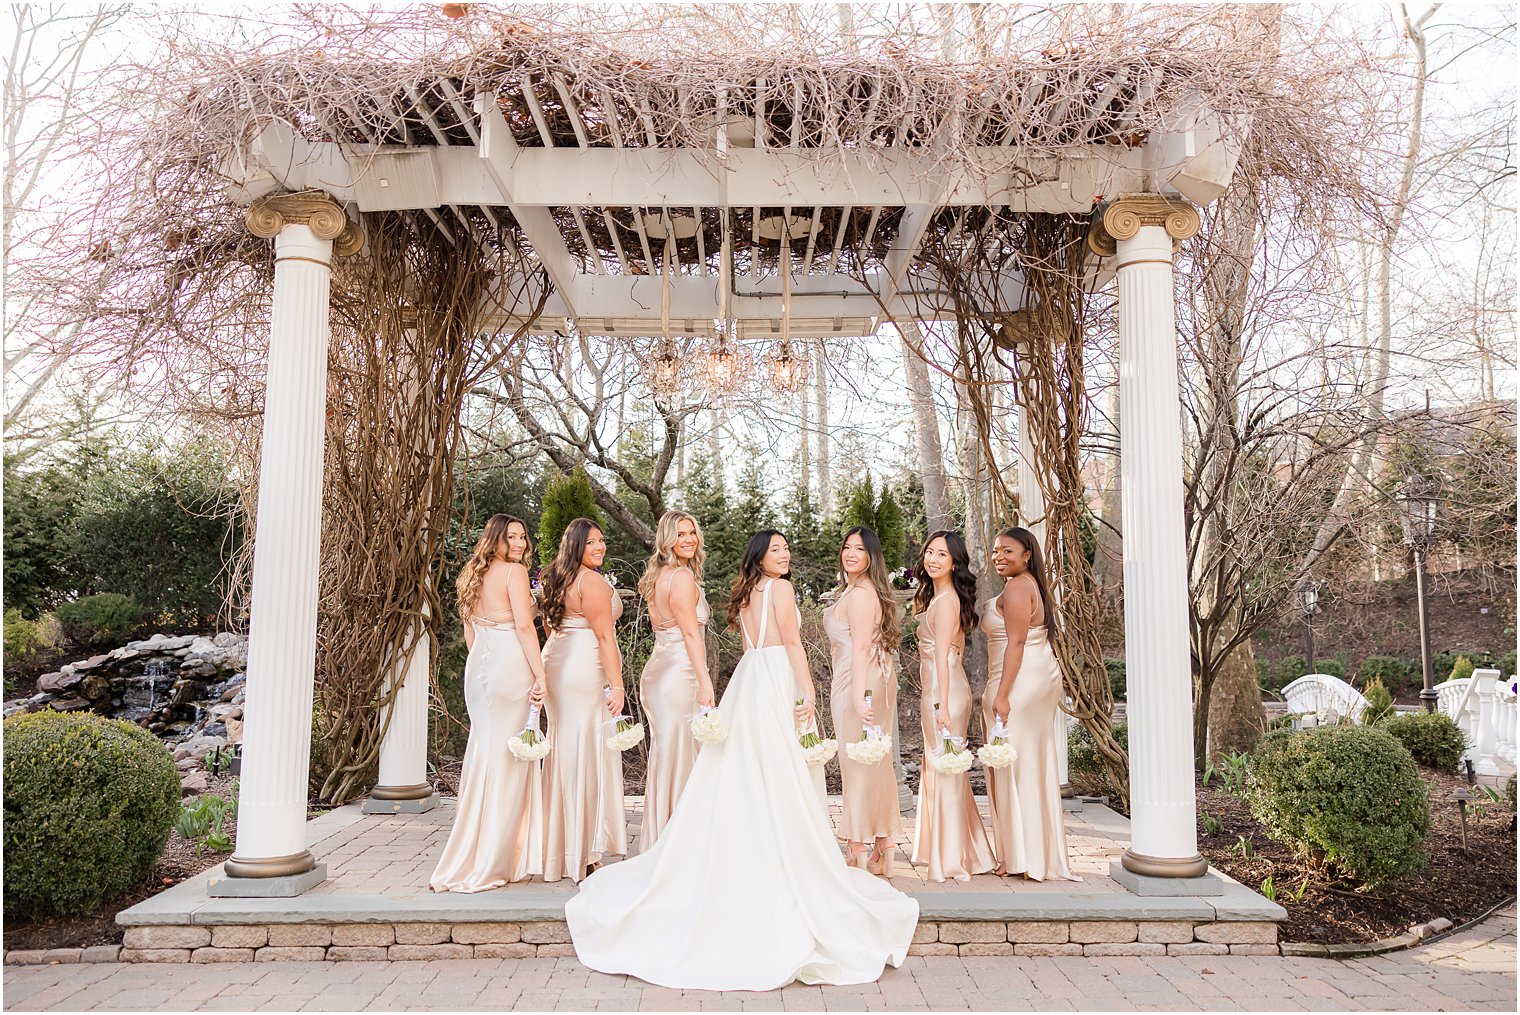 bride and bridesmaids in champagne gowns pose with bouquets behind their backs 